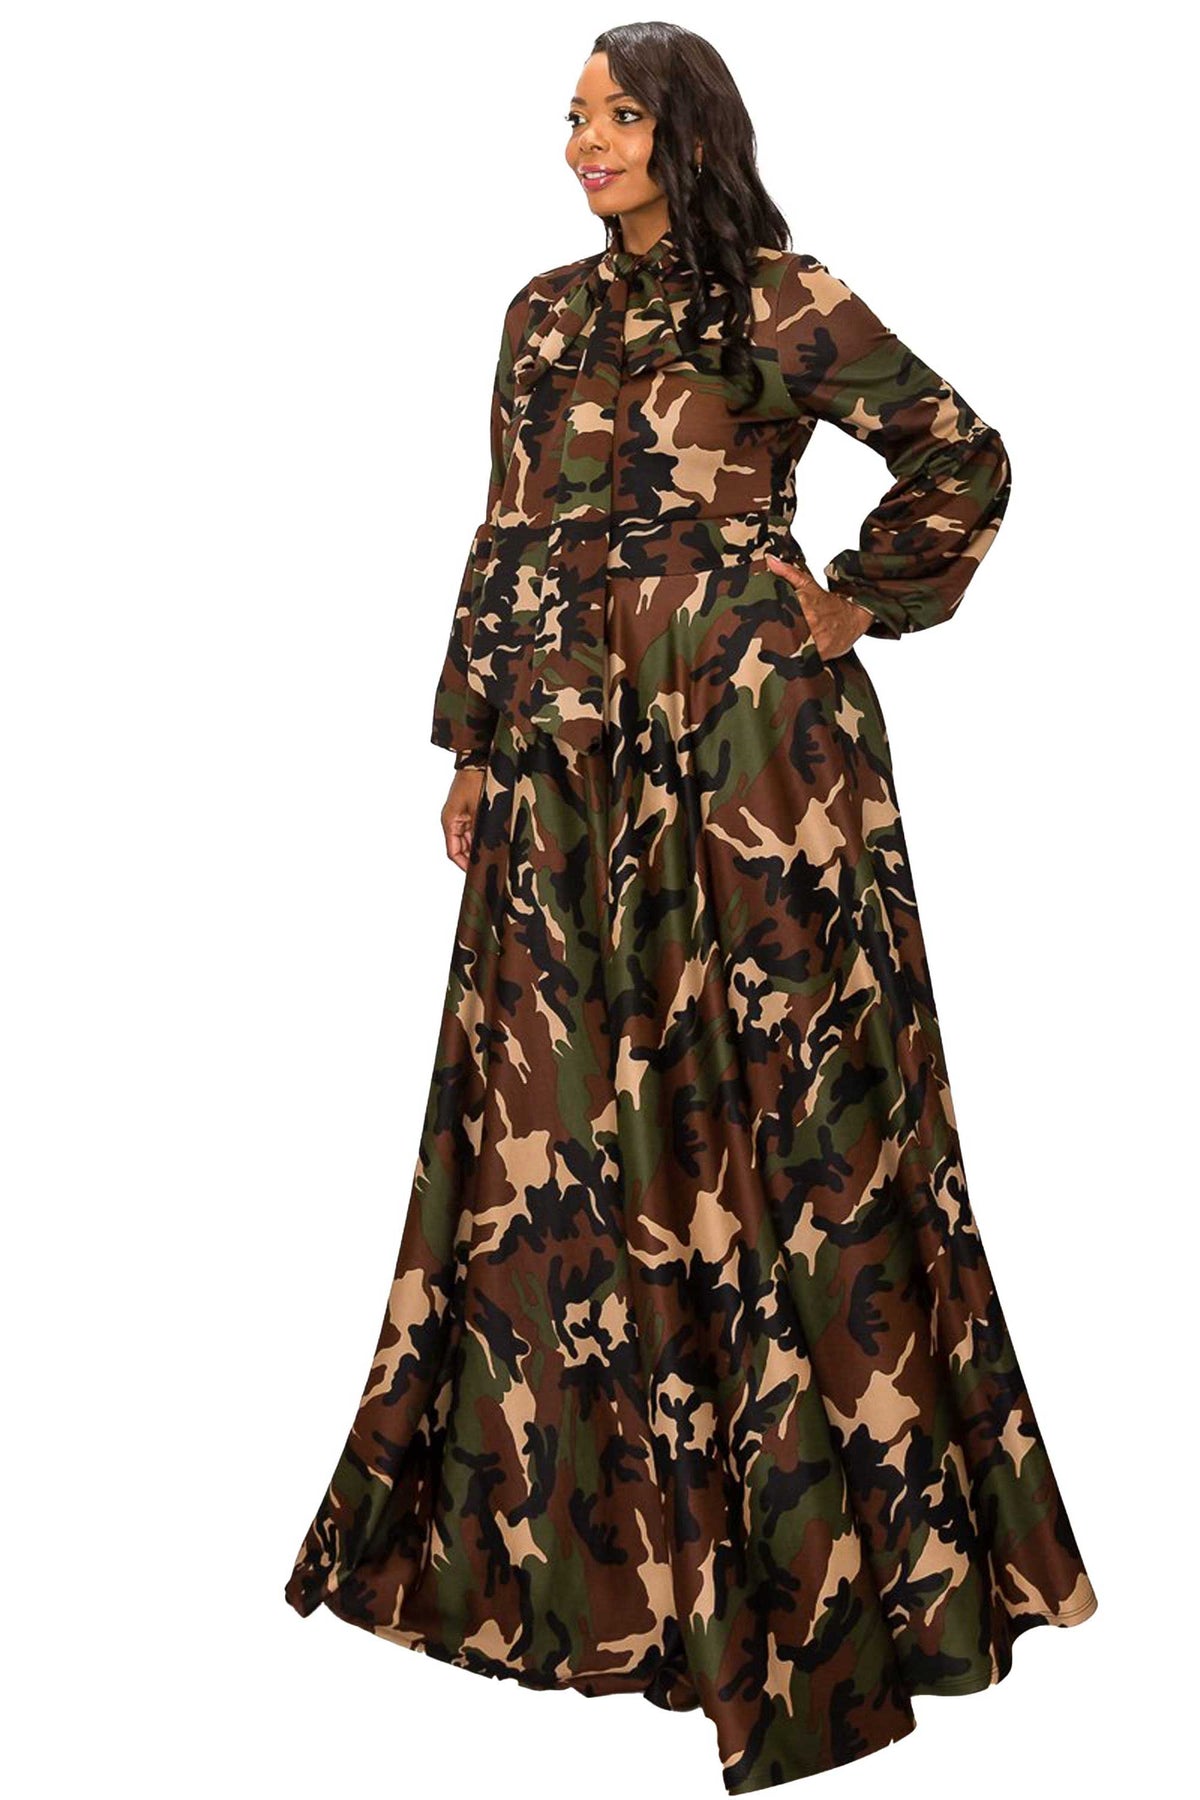 Camo Bella Donna Dress with Ribbon and Puffed Out Sleeves